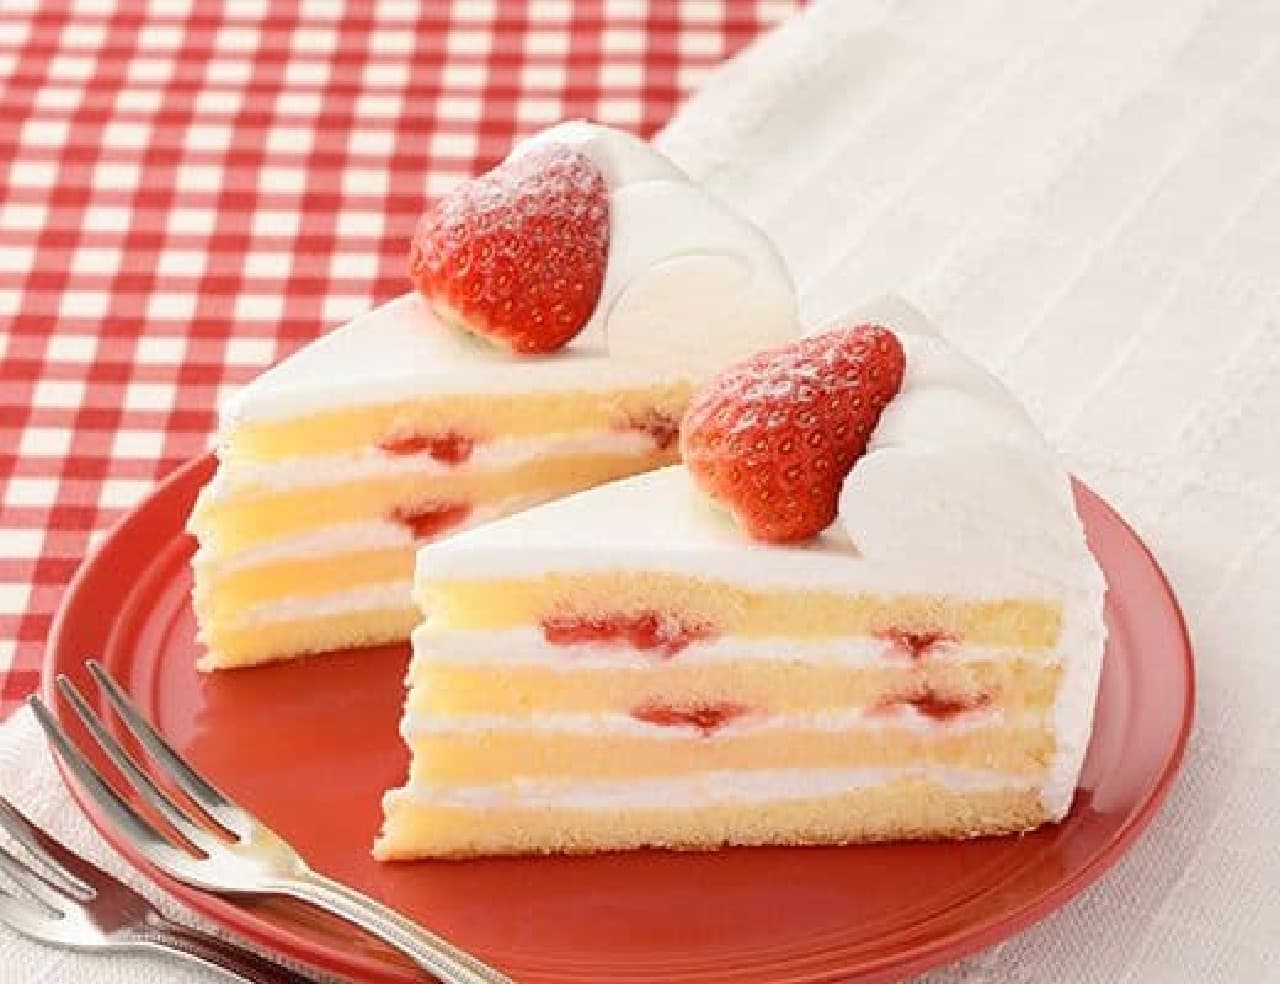 Lawson "Party Cake Strawberry Short 2 pieces